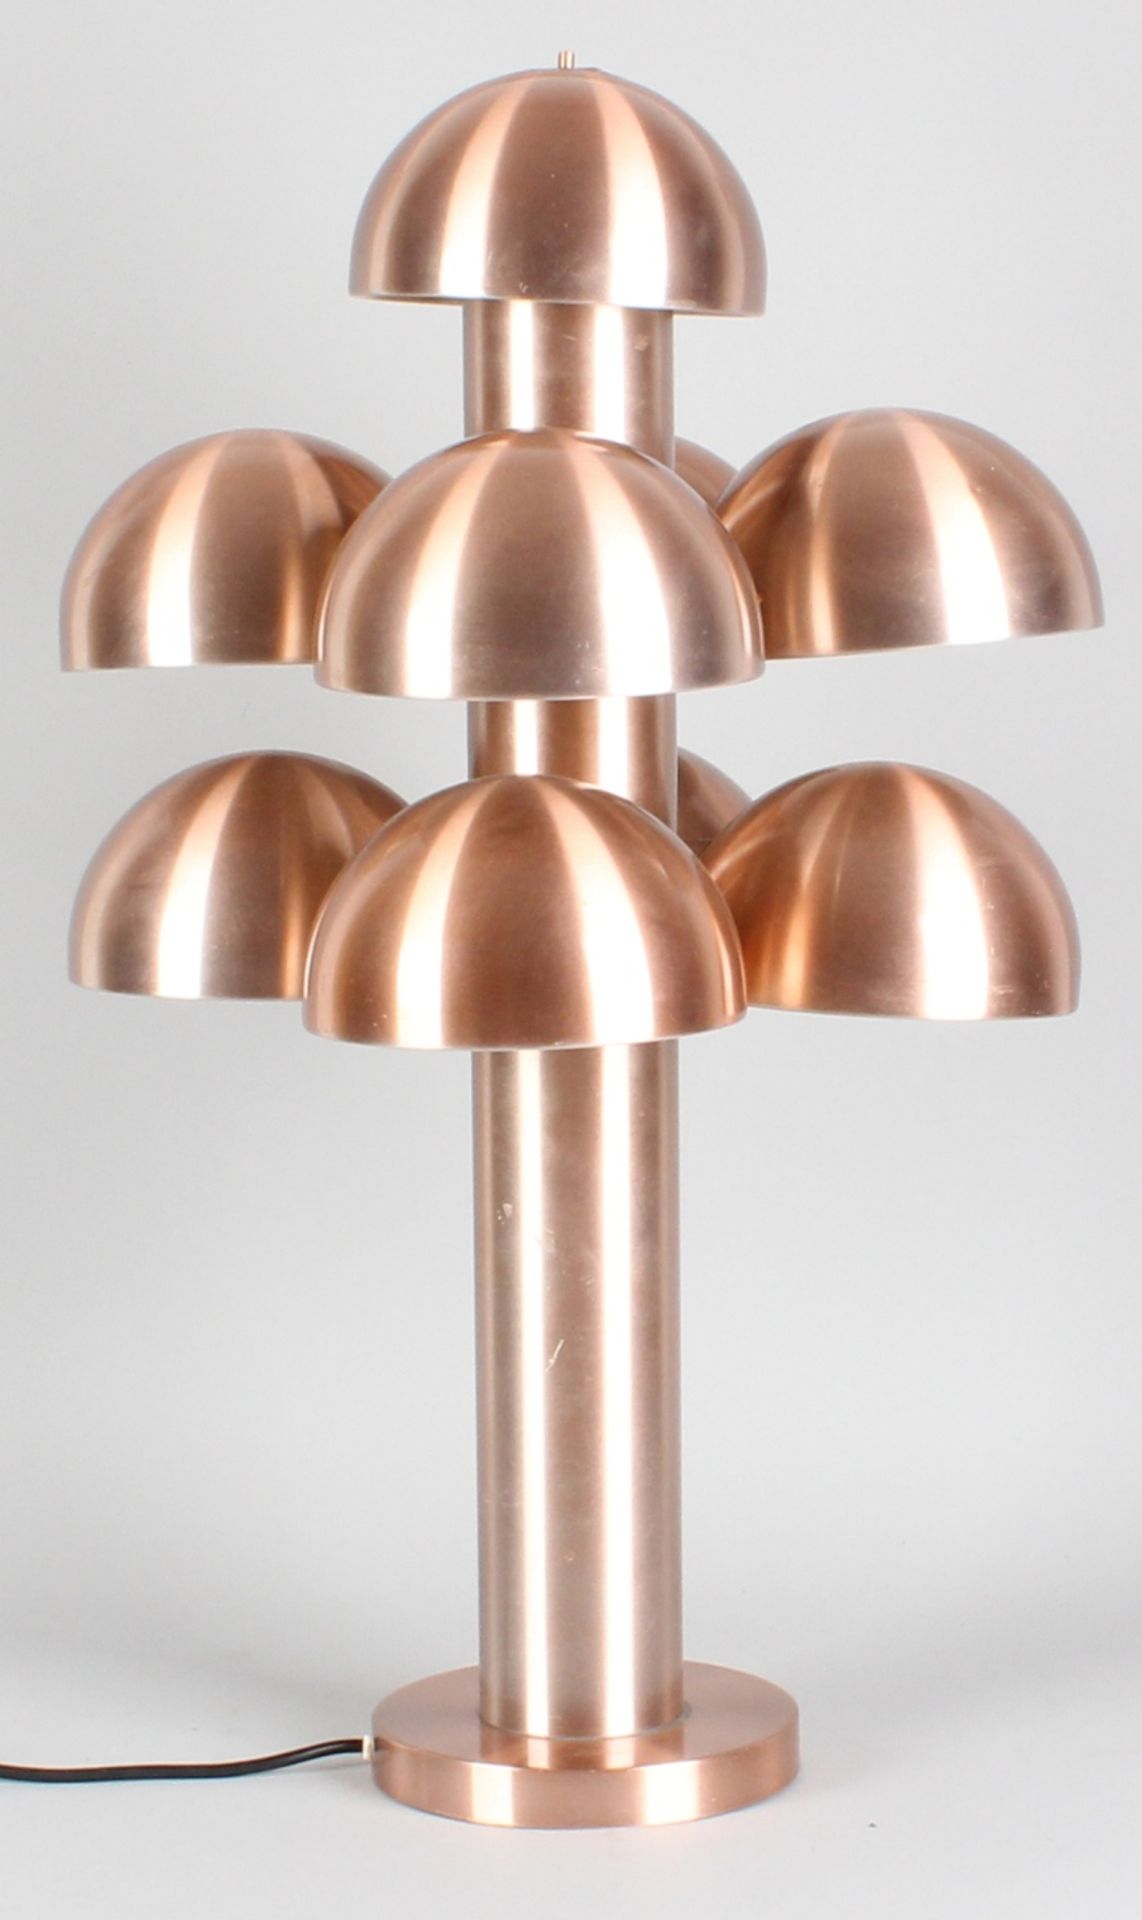 Rare old aluminum design, touch lamp No. 185 model Cantharelle 1970, Amsterdam, minimal user traces,